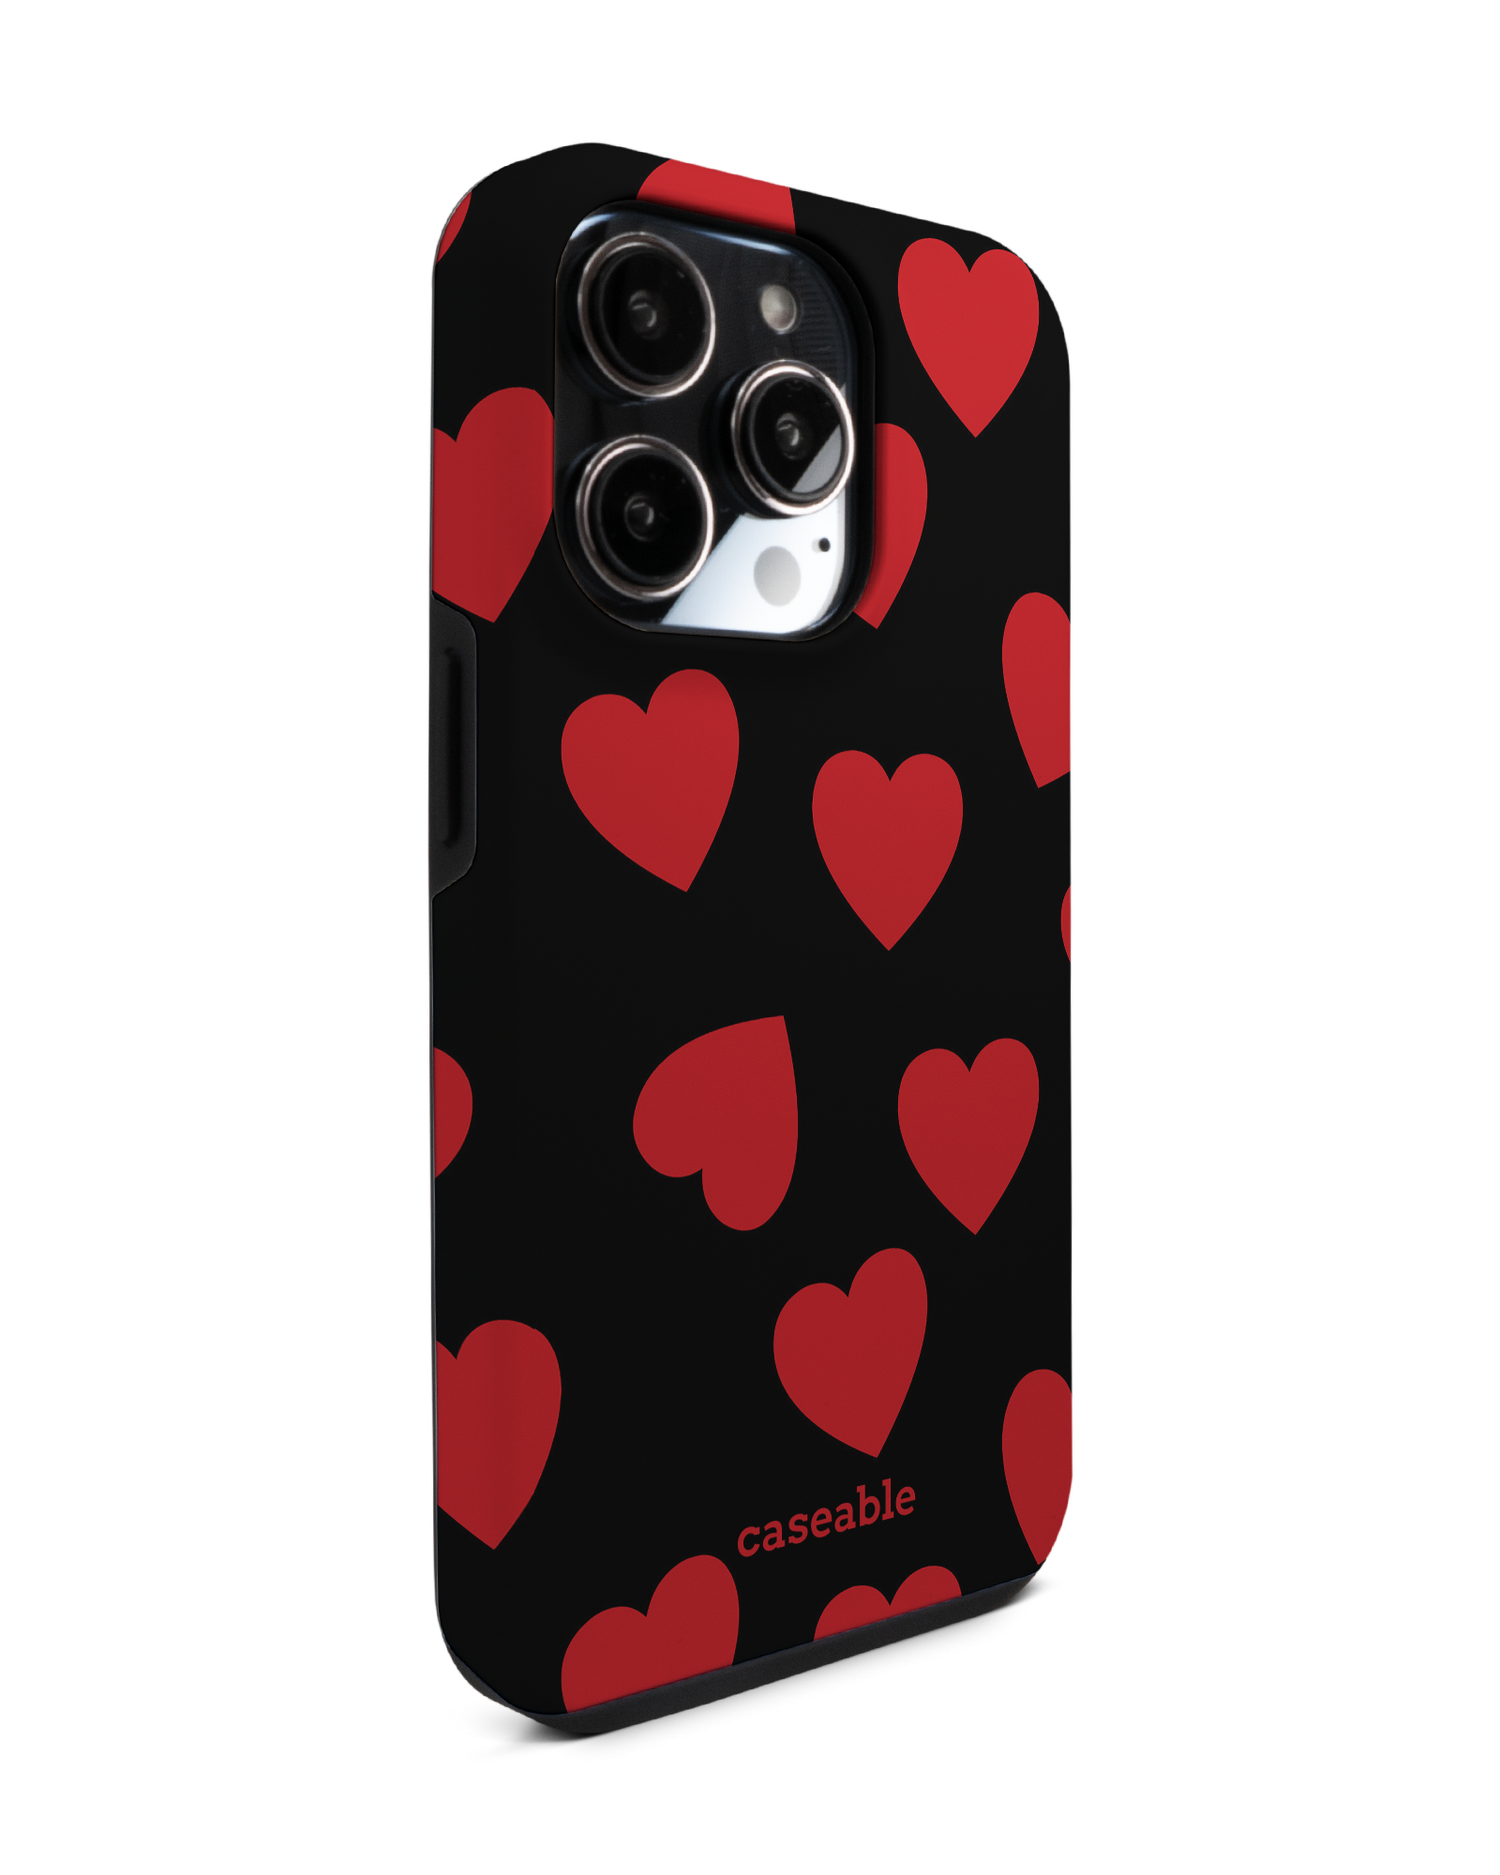 Repeating Hearts Premium Phone Case for Apple iPhone 14 Pro: View from the left side